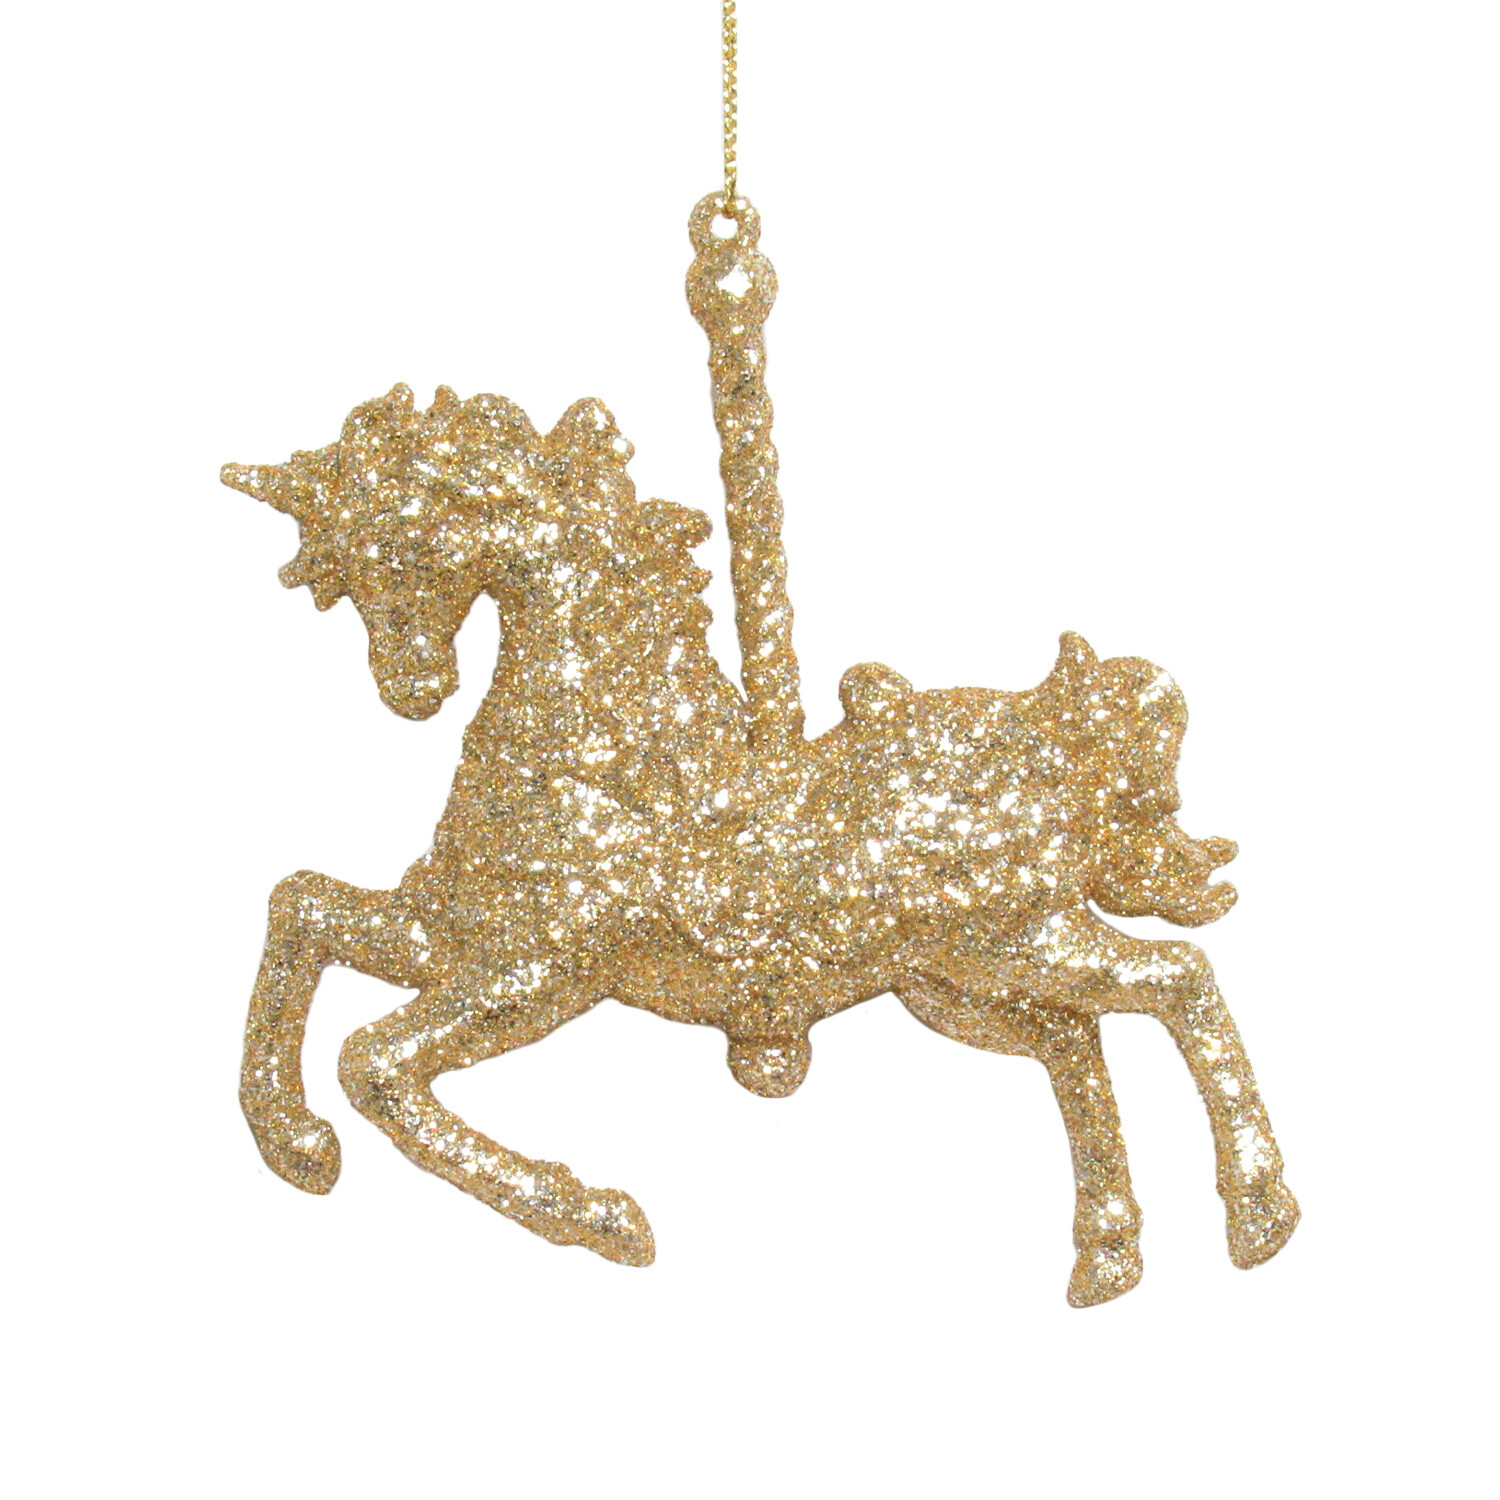 Single Grace & Glory Gold Glitter Carrousel Ornament in Assorted styles Image 2